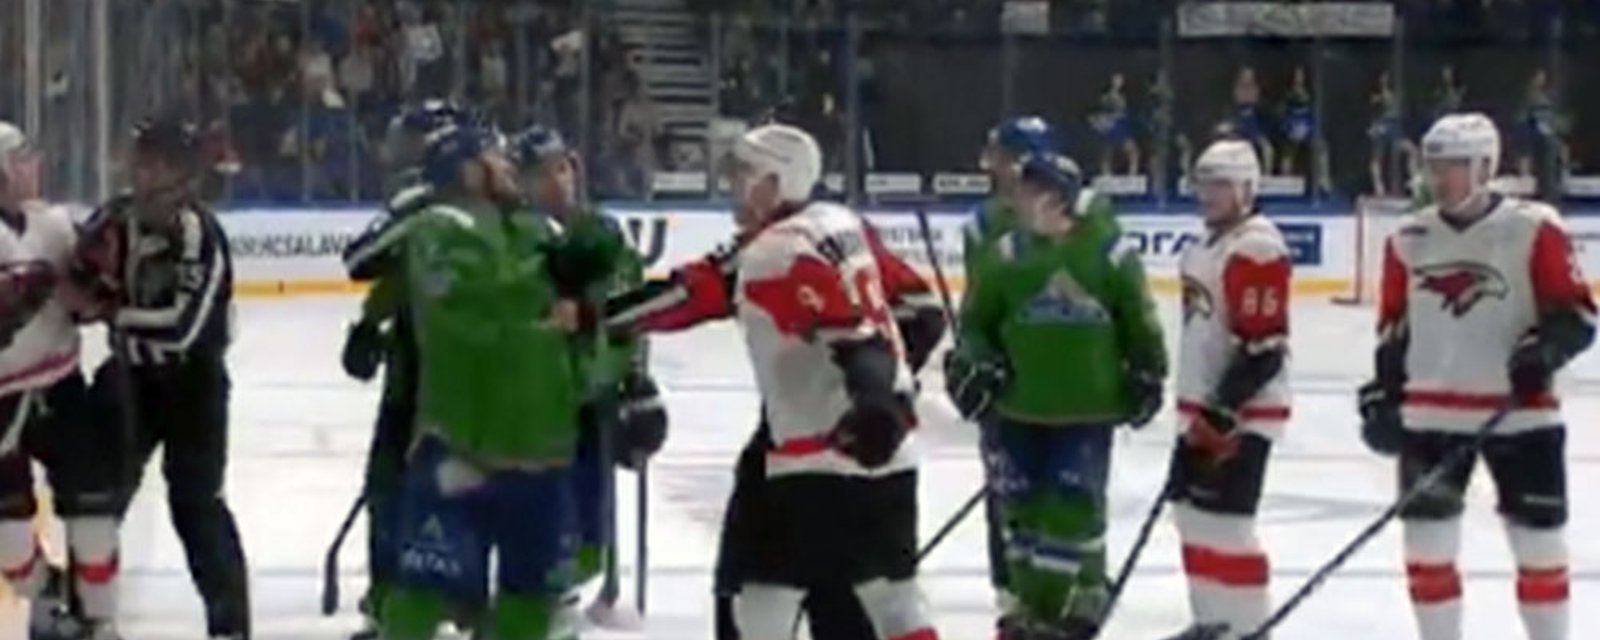 Former NHLer Linus Omark embarrasses himself with pathetic dive in KHL